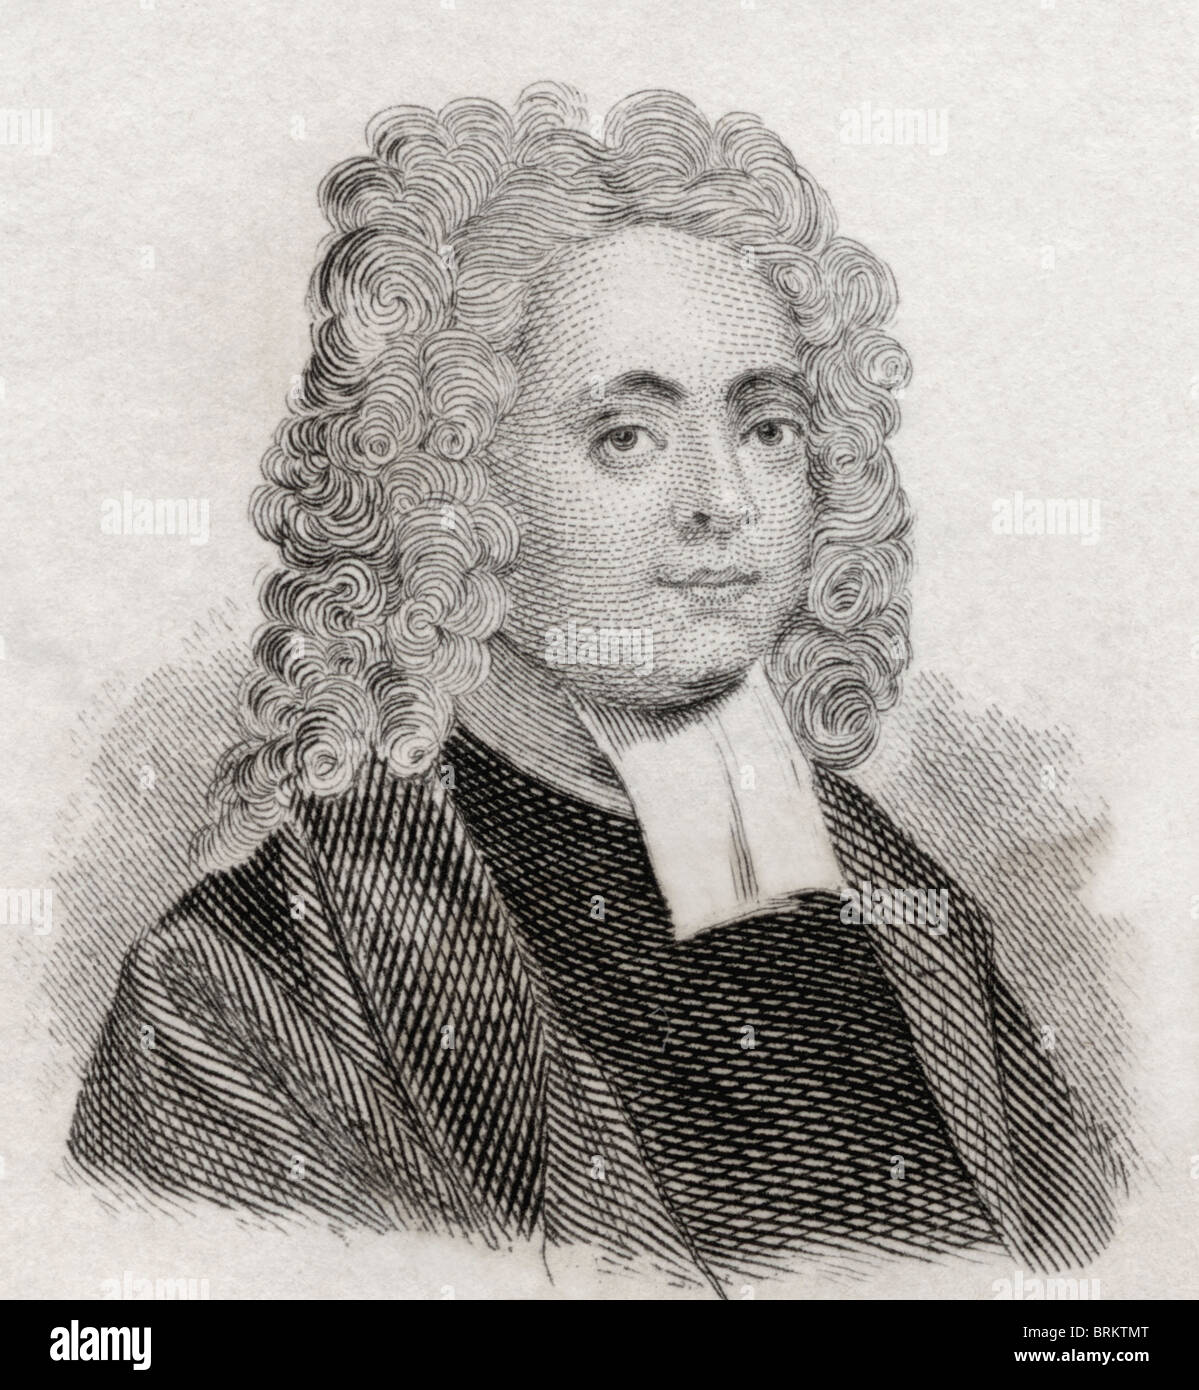 William Broome, 1689–1745. English poet and translator. From Crabb's Historical Dictionary published 1825. Stock Photo